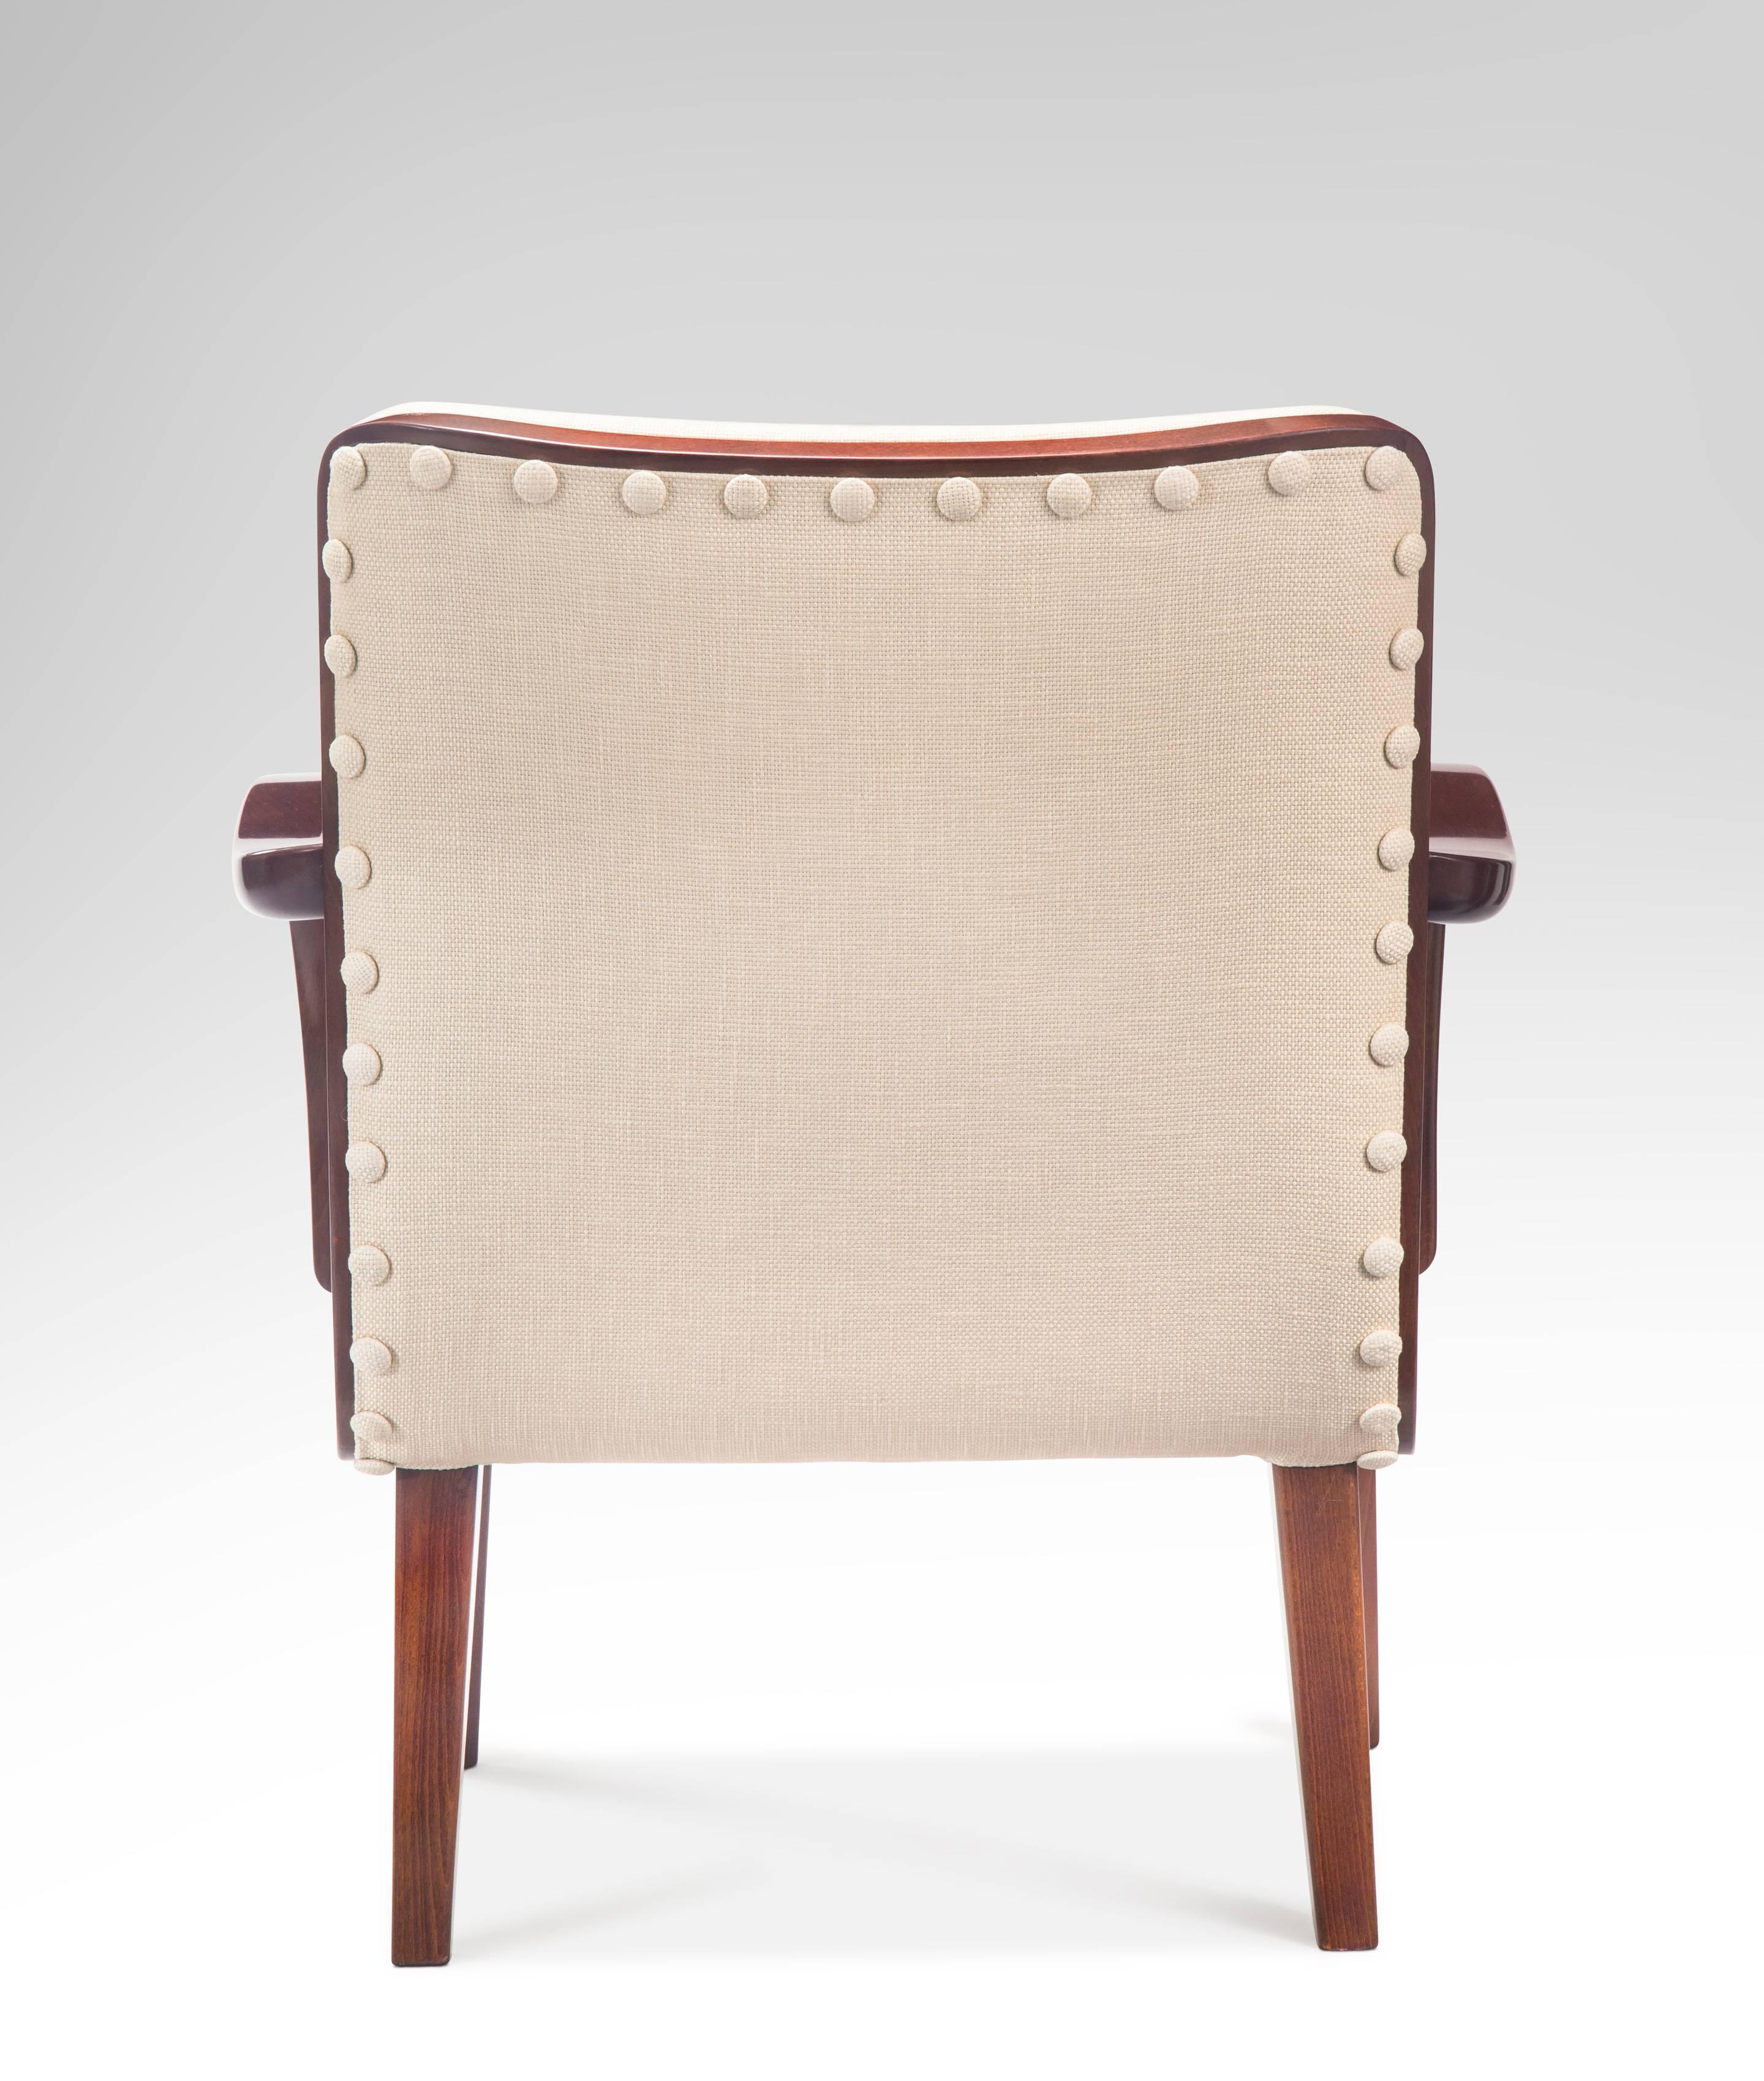 Axel Larsson for Bodafors, Attributed, Swedish Upholstered Beech Armchair 1